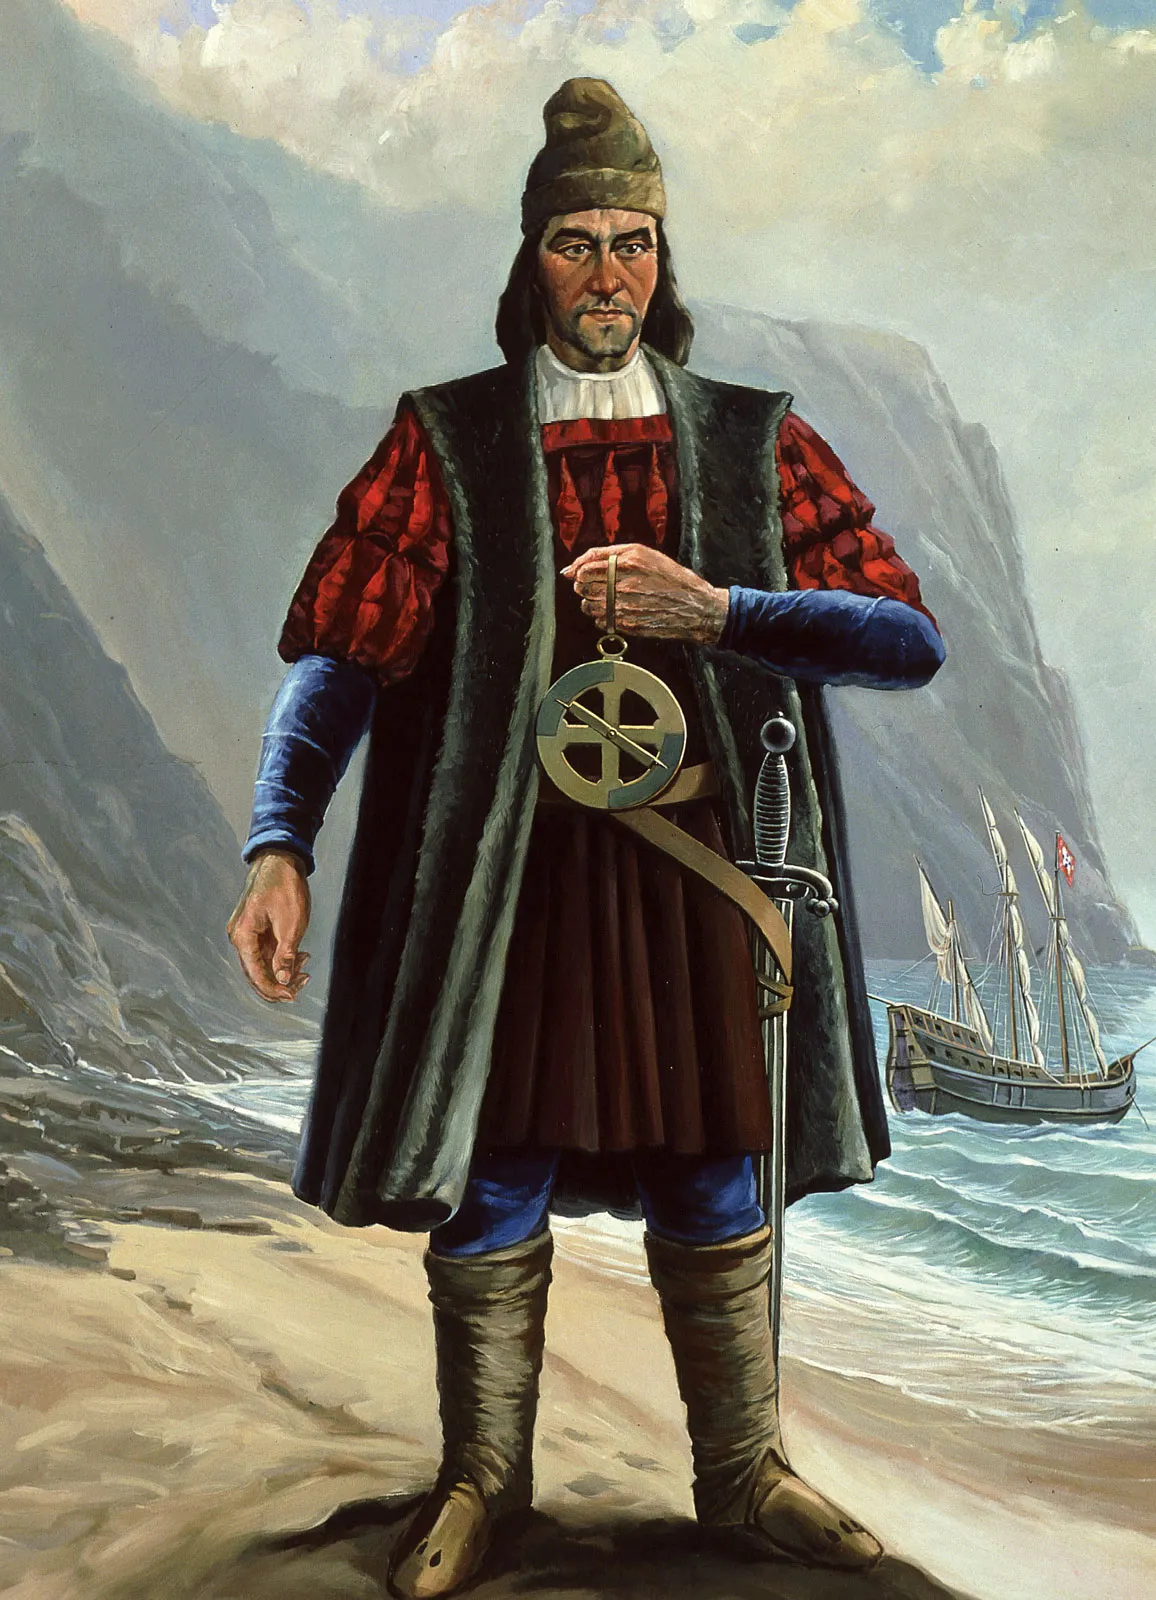 <p>A portuguese explorer who sailed around the southern tip of Africa, the Cape of Good Hope, in 1488, into waters he did not know. He returned home after fearing that if he continued to push eastward he would face mutiny. LO 2) Portugal&apos;s interests of the state and interest of explorers were closely tied. They would send out ships to explore land leading to the expansion of maritime exploration.</p>